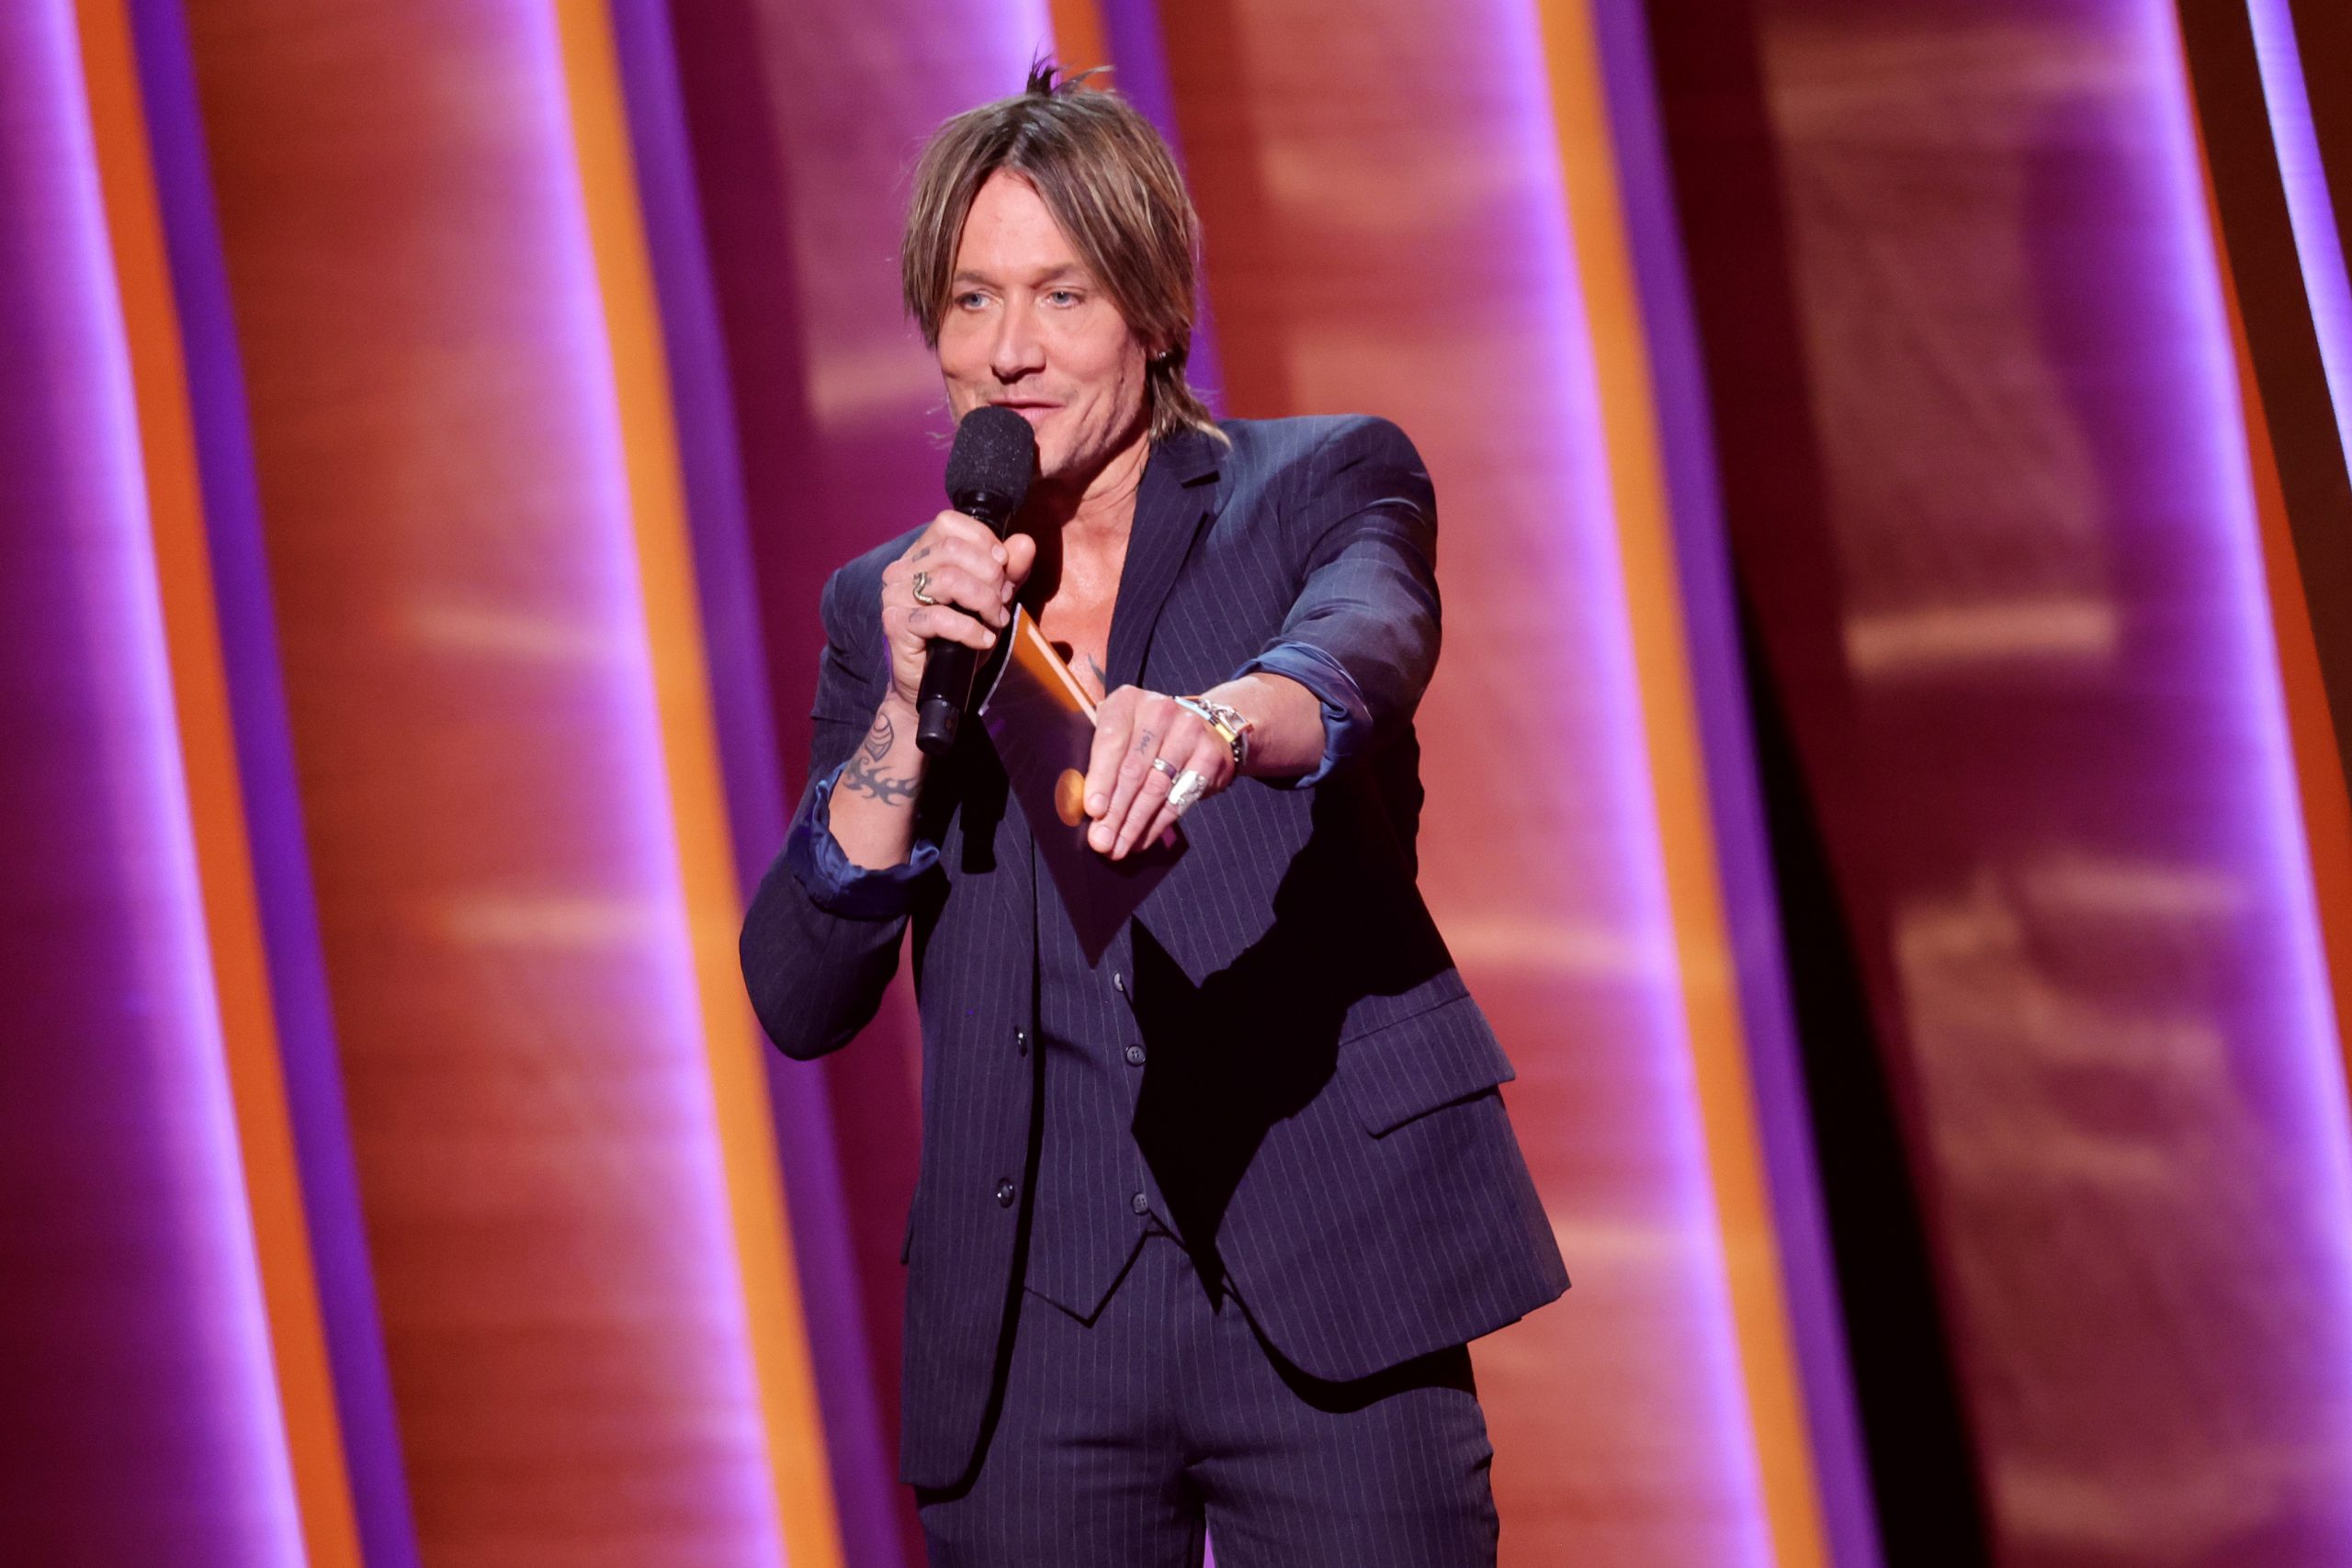 Keith Urban, the musician behind 'Golden Road,' speaks into a mic on stage.